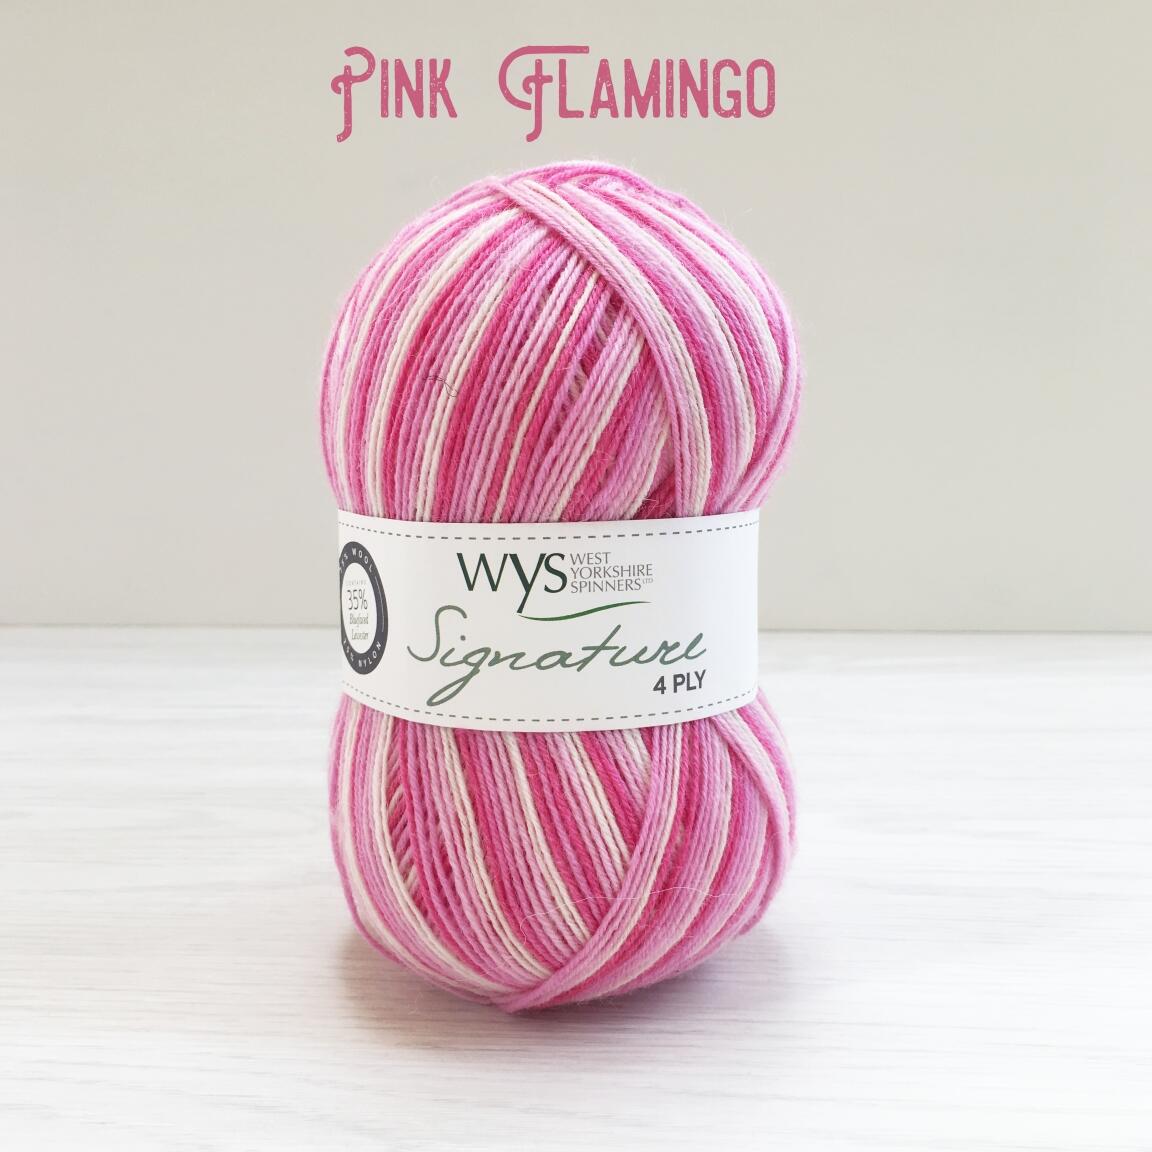 West Yorkshire Spinners Signature 4ply "Cocktail Range " Farbe: Pink Flamingo